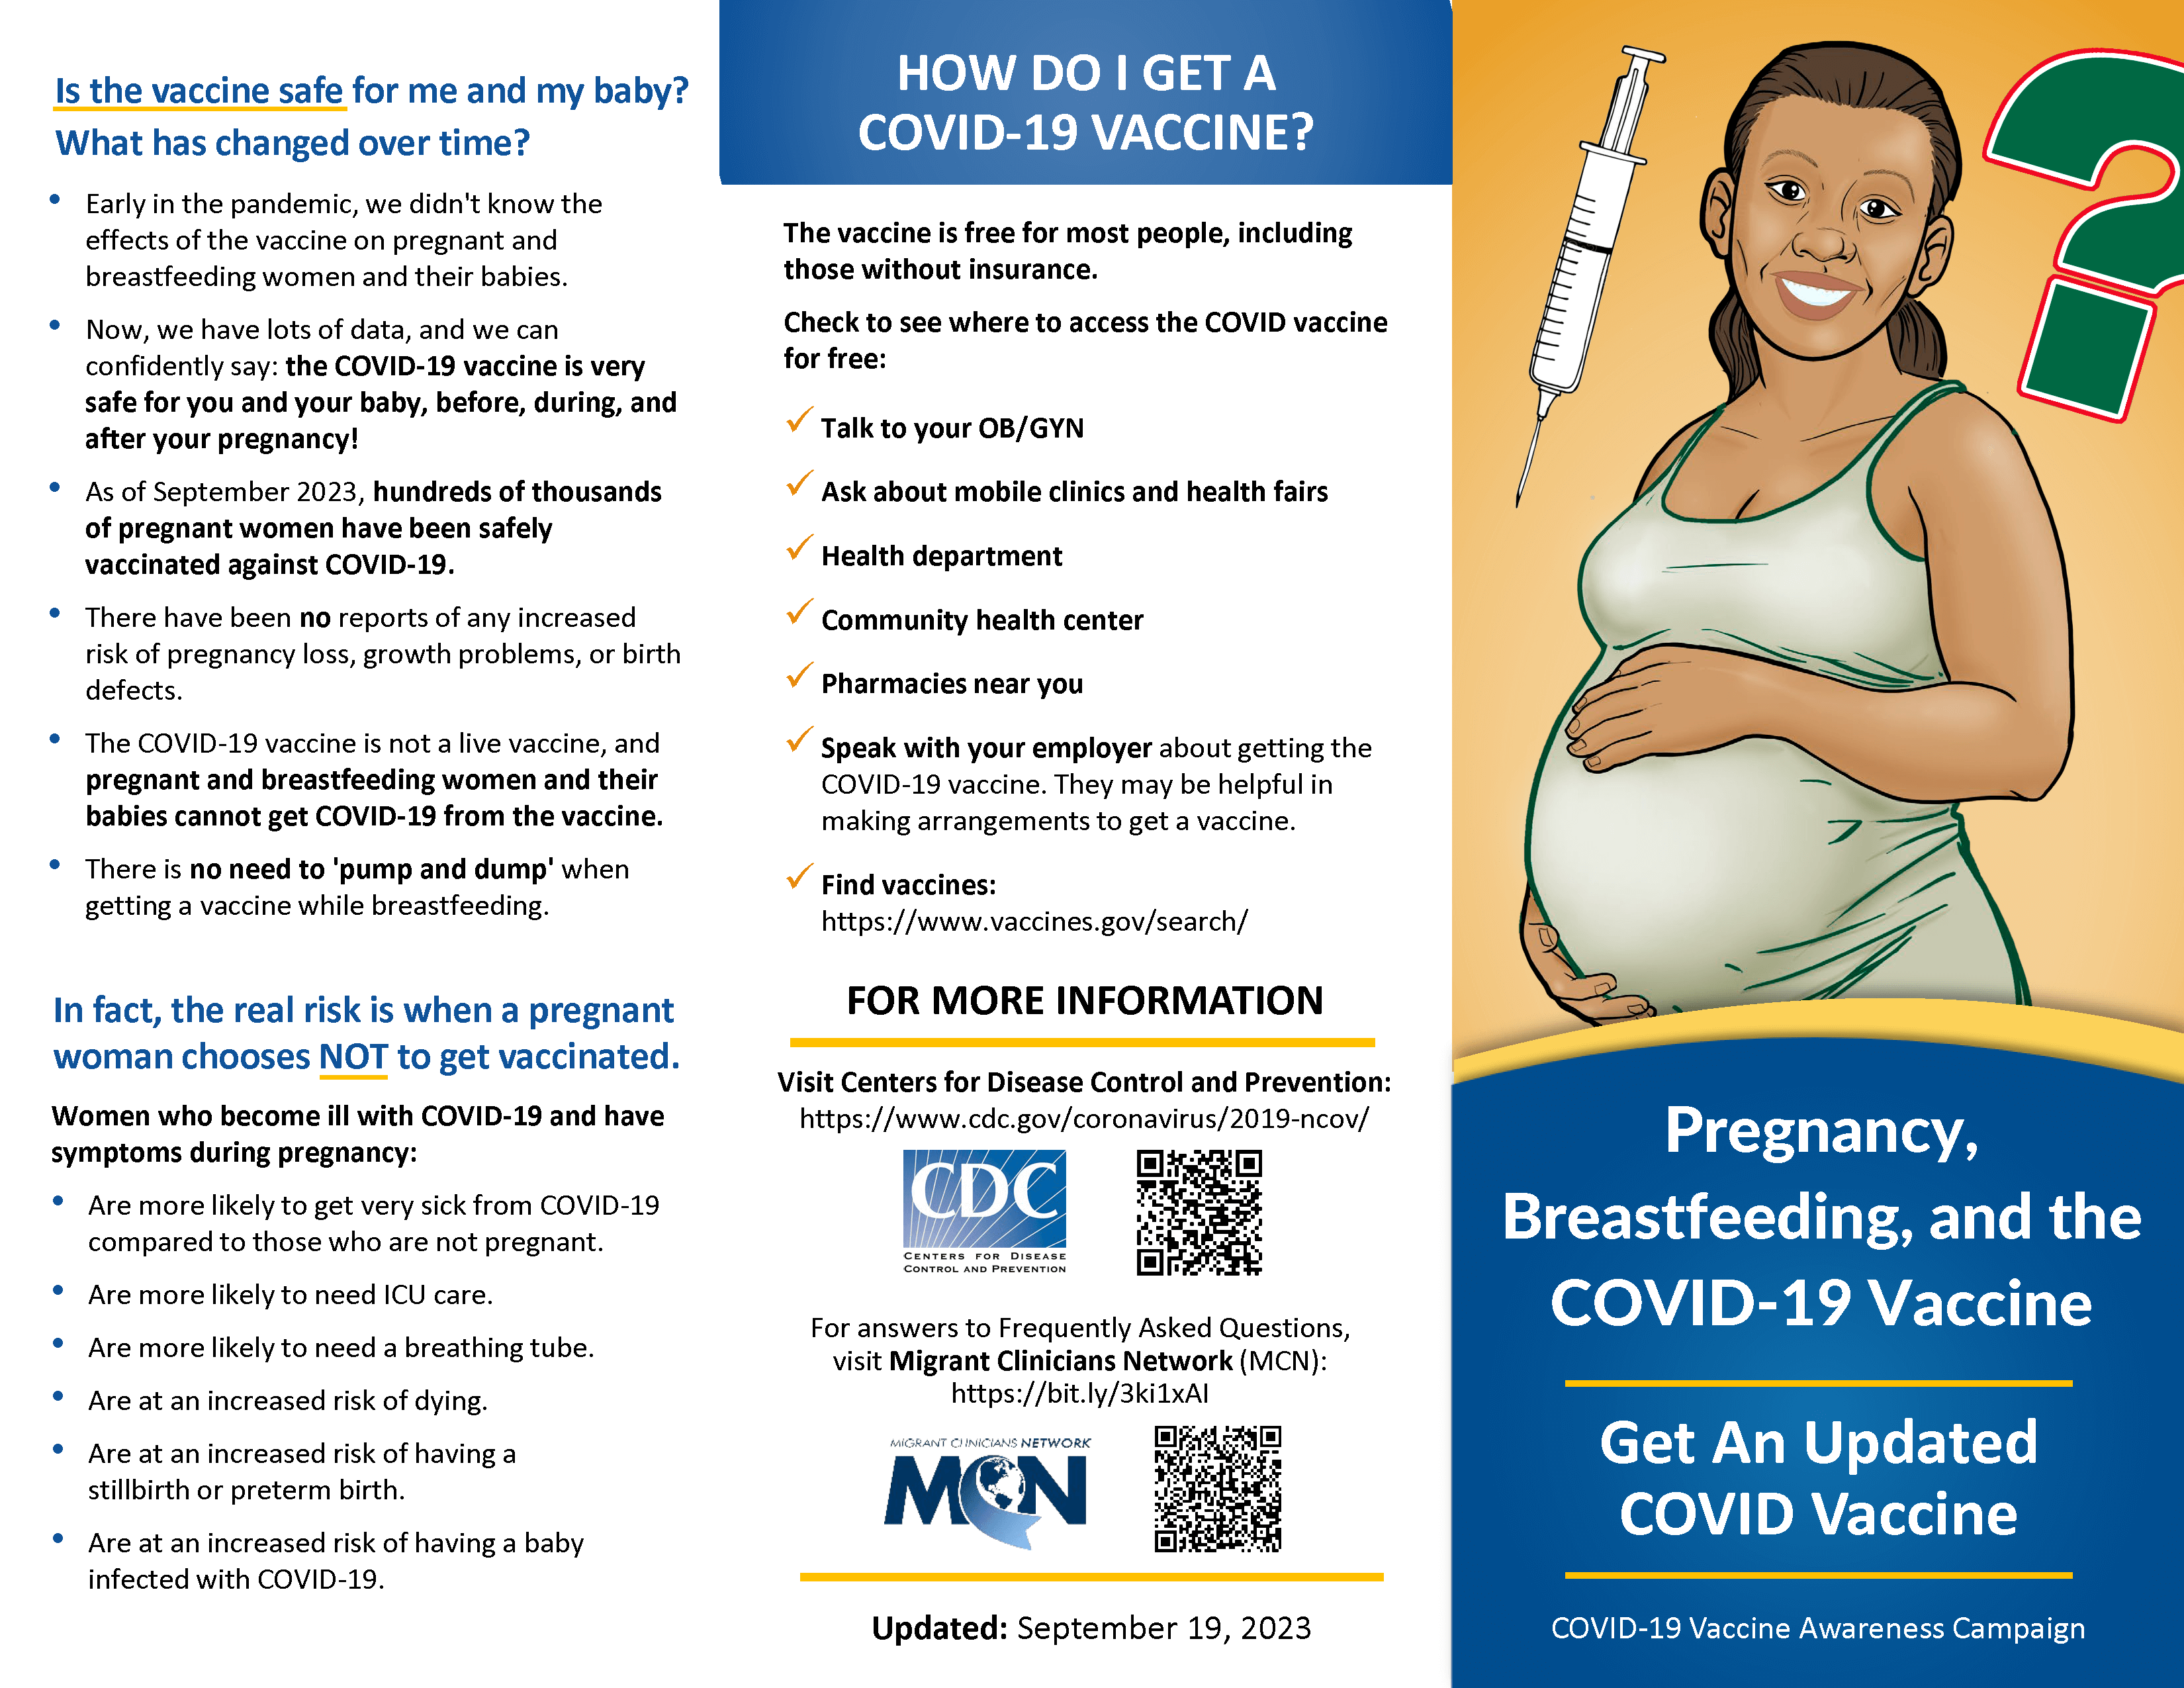 Pregnancy and the COVID-19 Vaccine - Handout